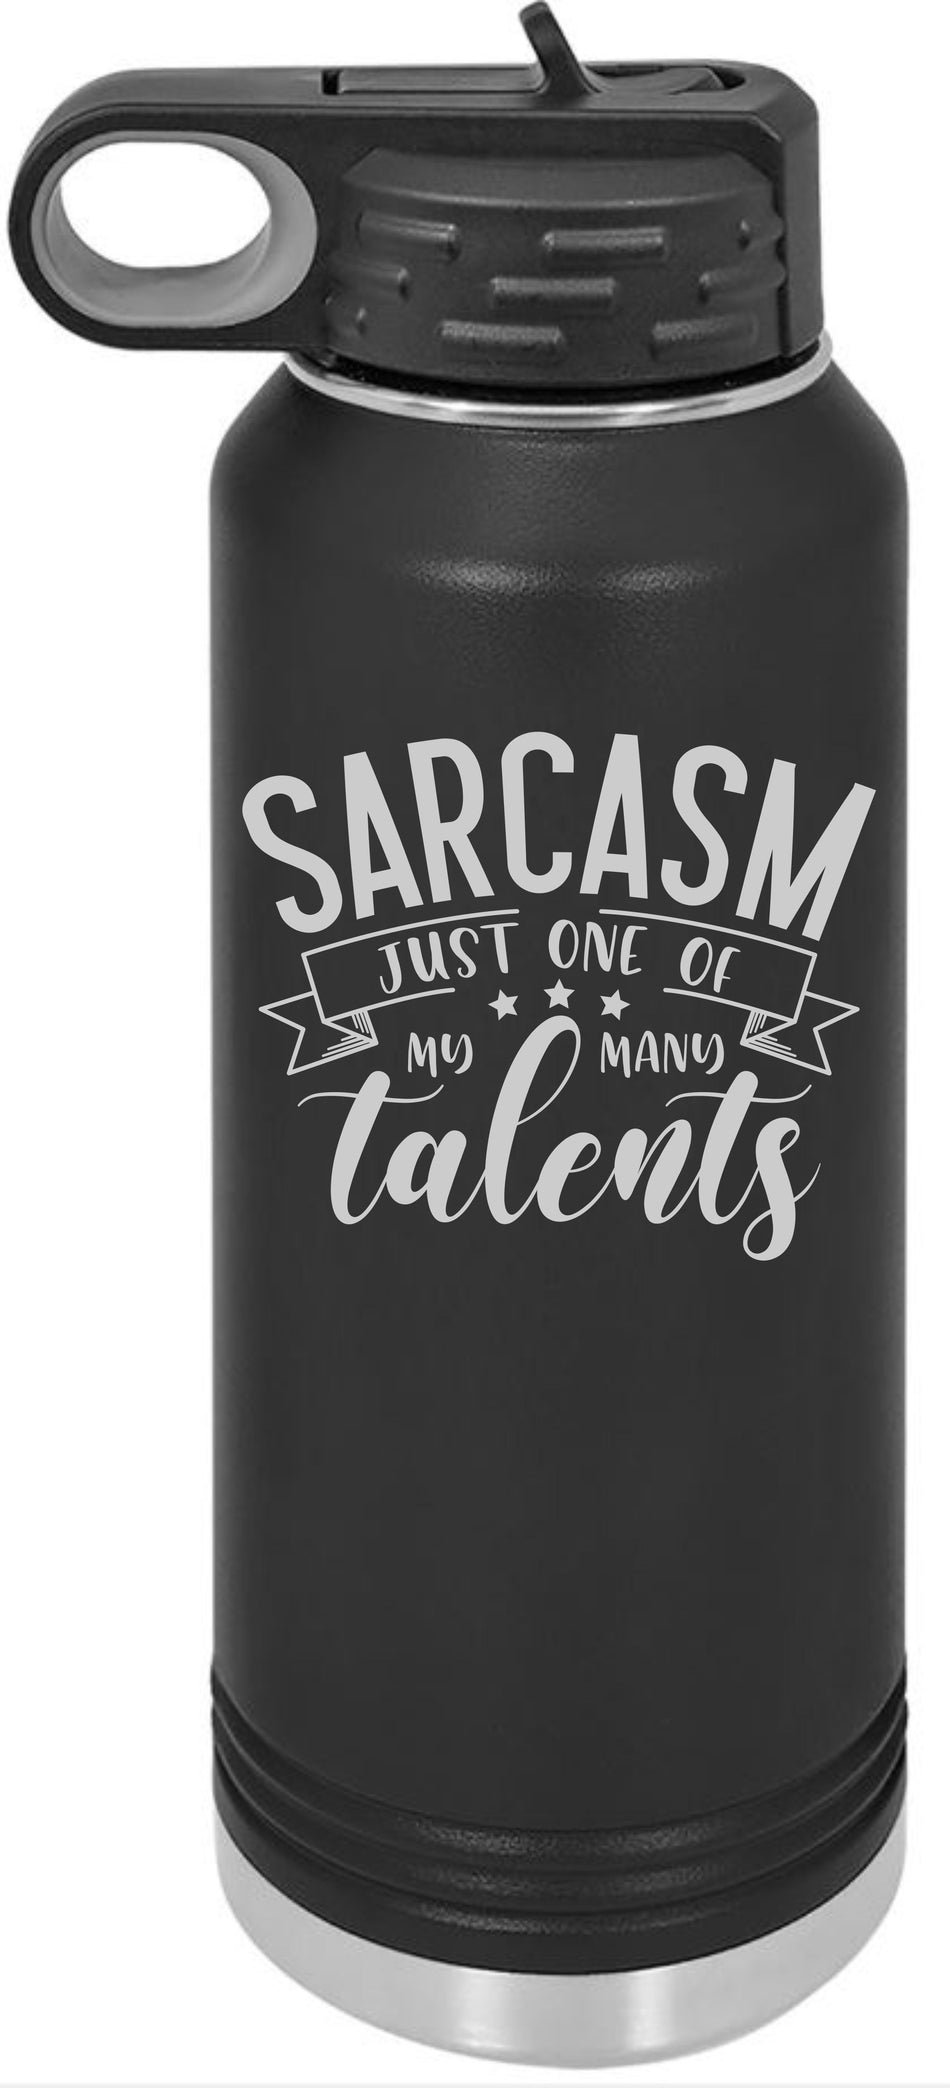 Sarcasm on of my talents Engraved 30oz. Water Bottle - Powercall Sirens LLC